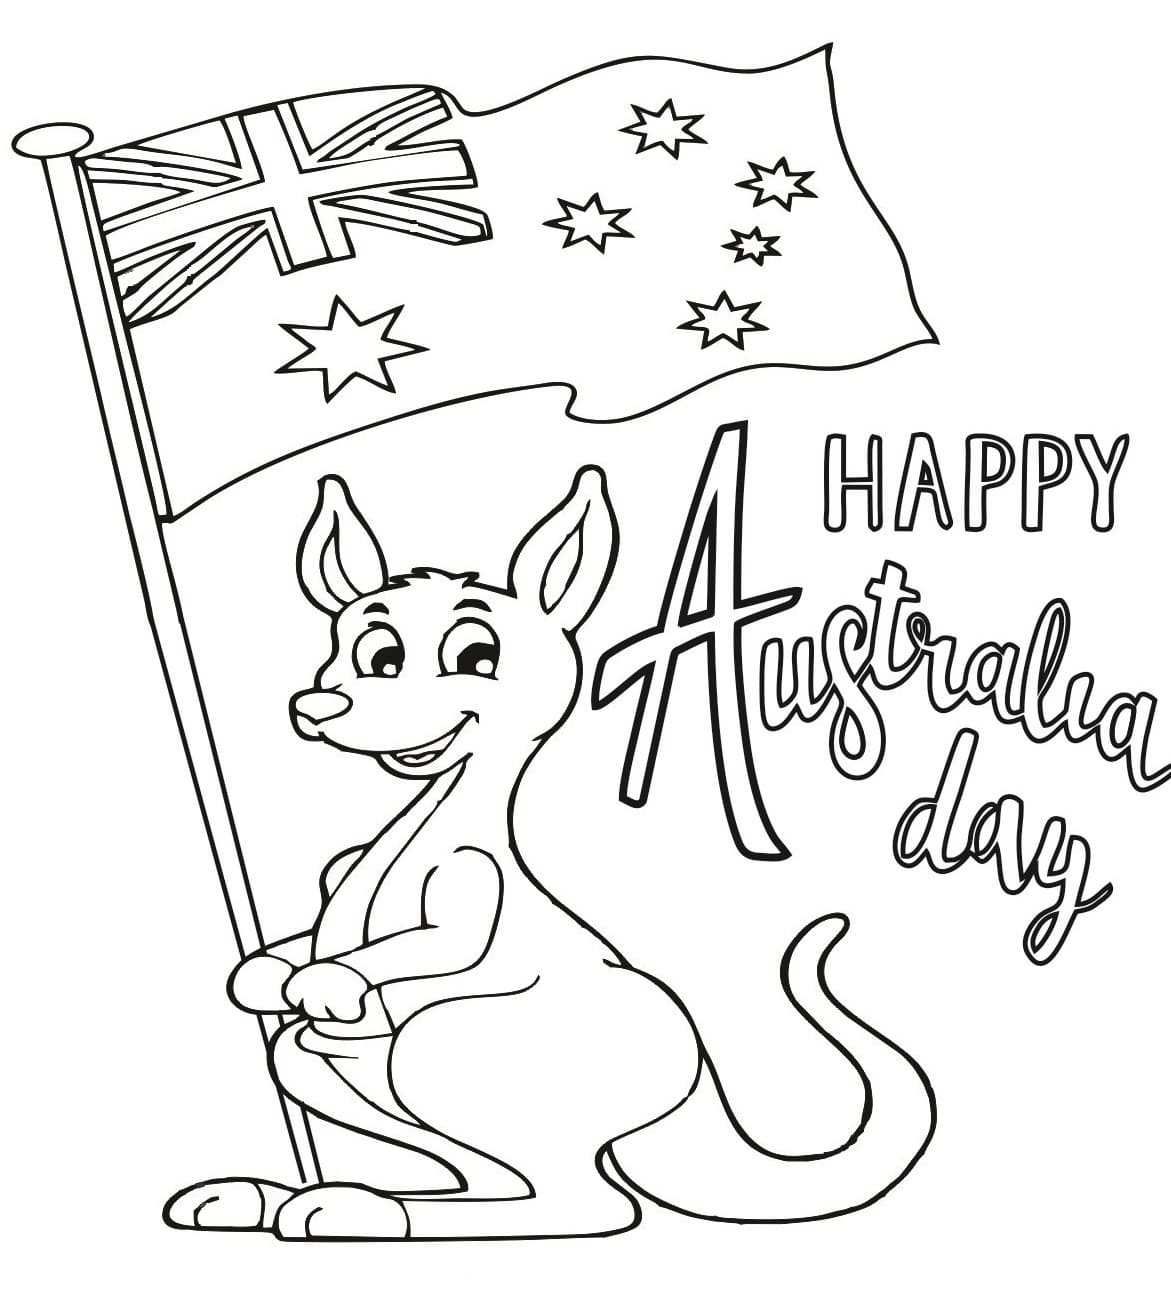 Coloring pages Day Australia. Print holiday pictures for free